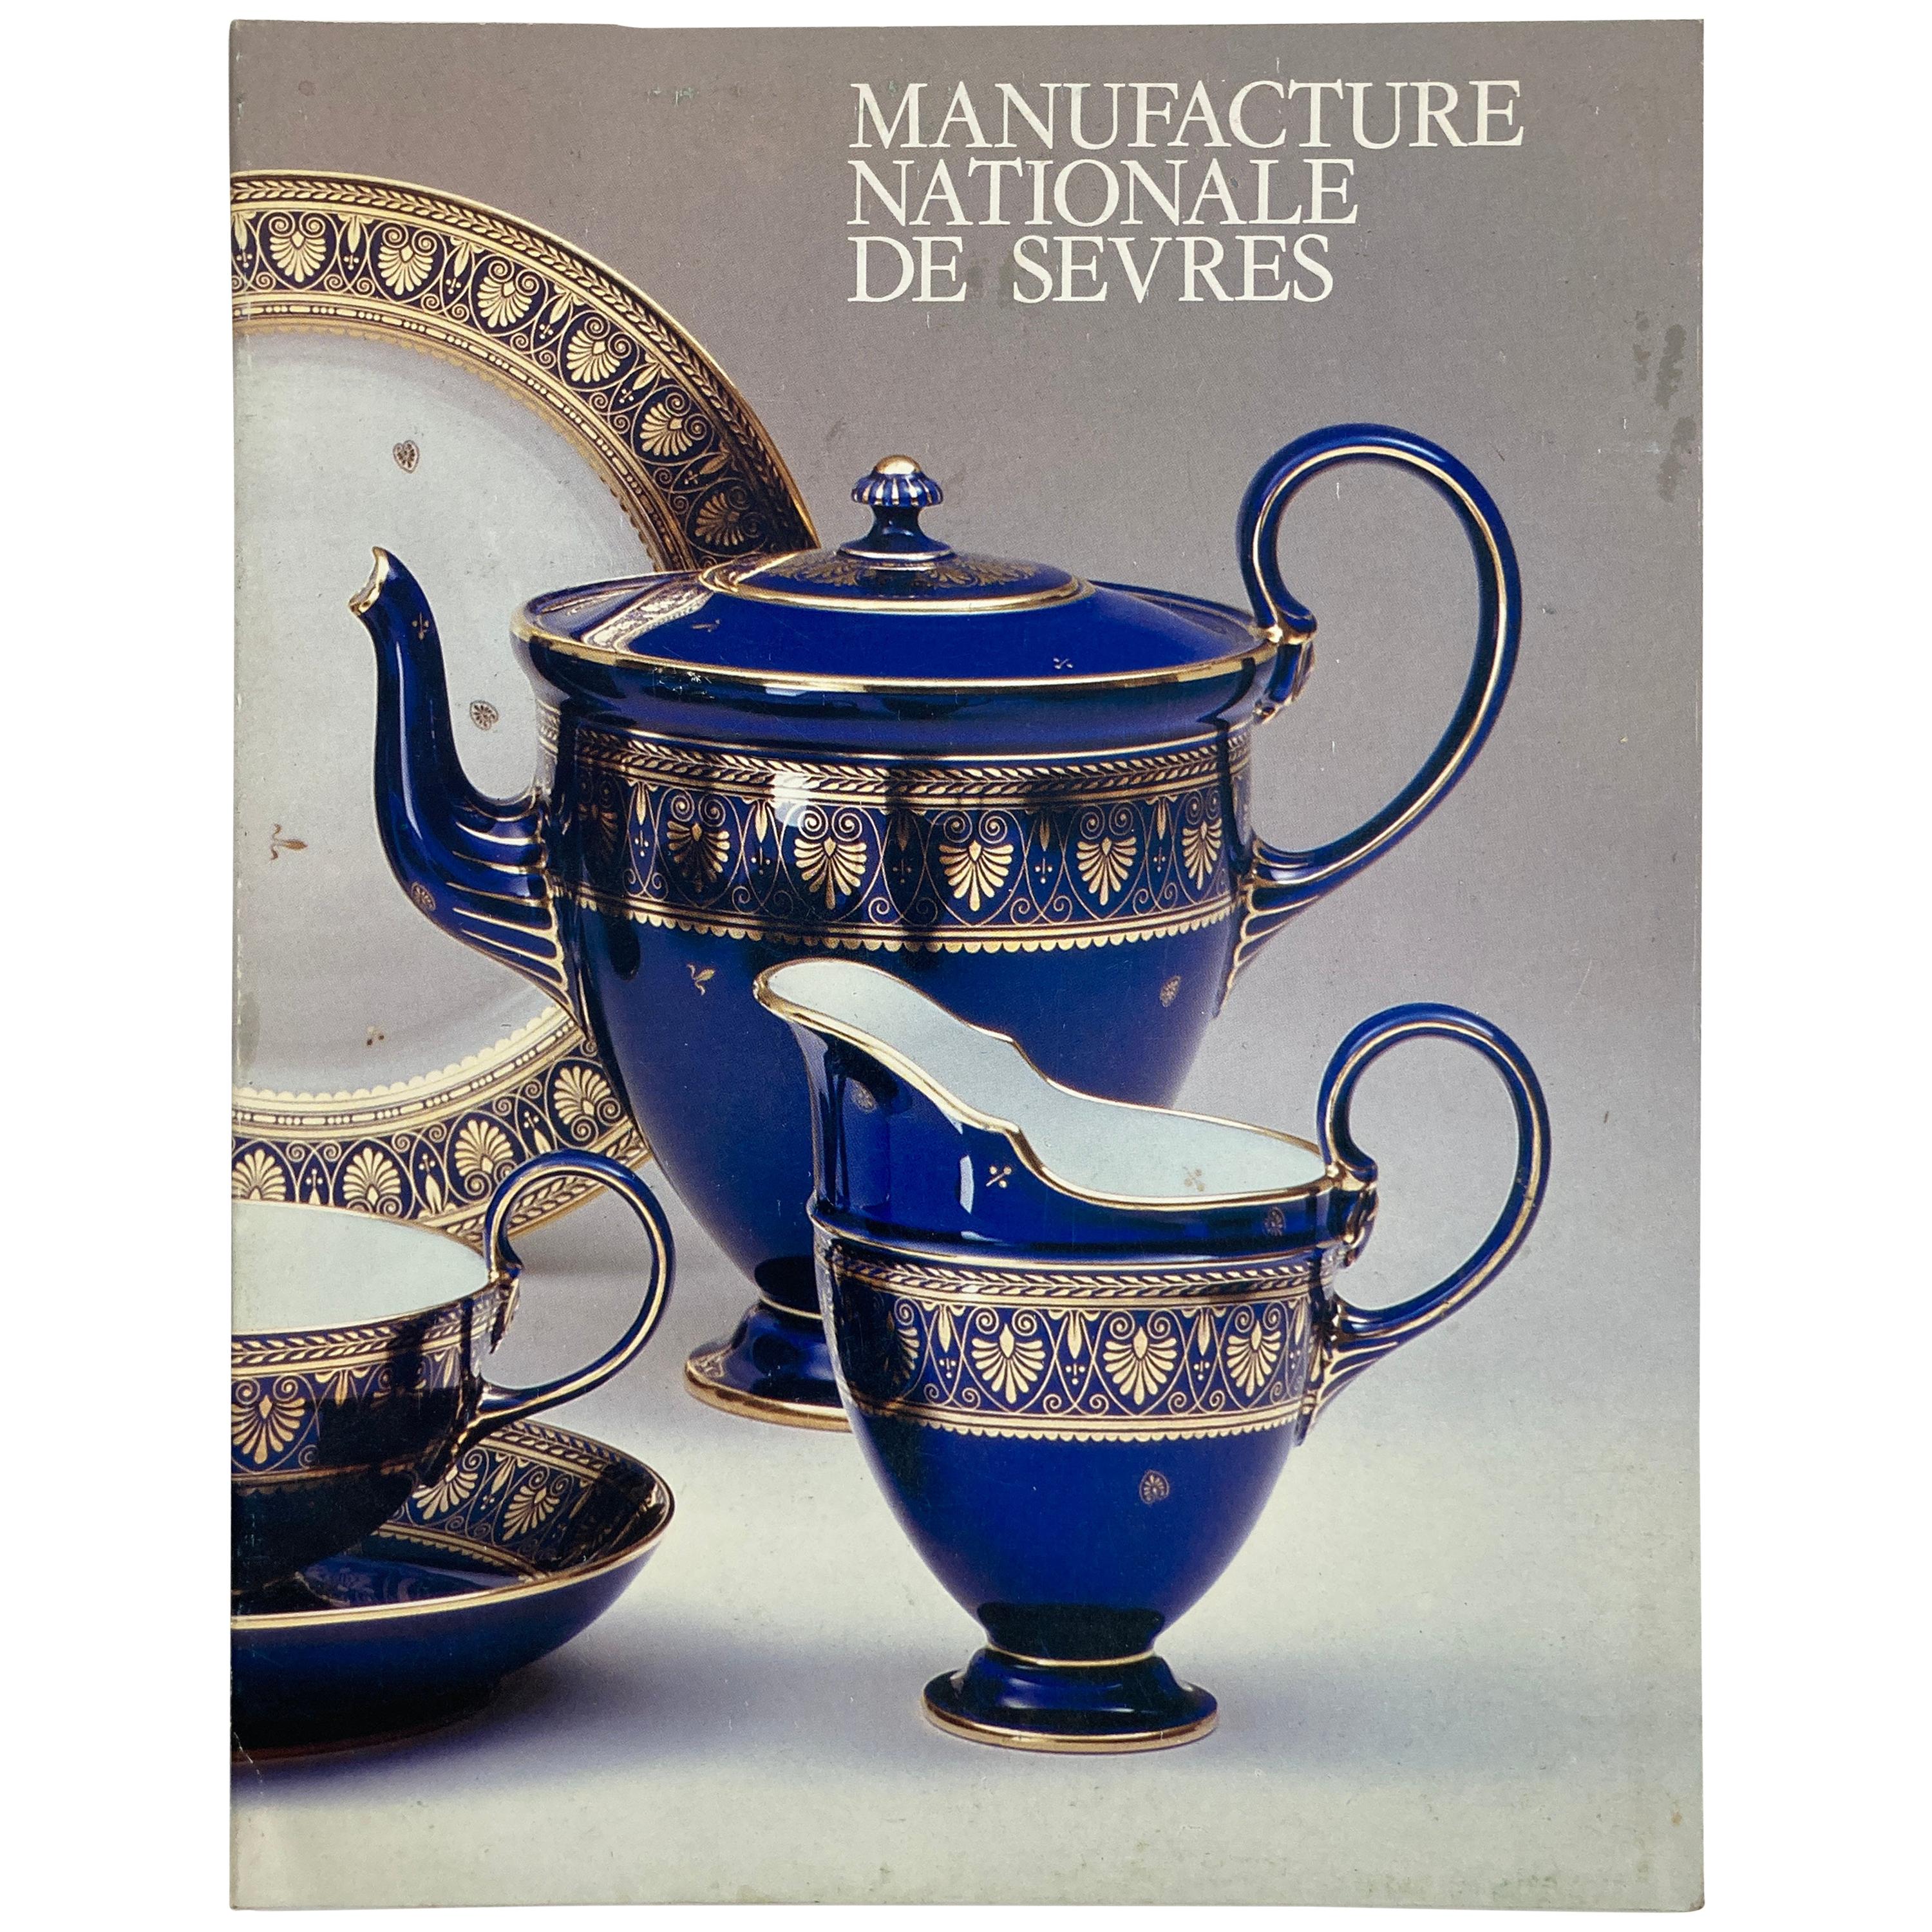 Manufacture Nationale de Sevres Book in French For Sale